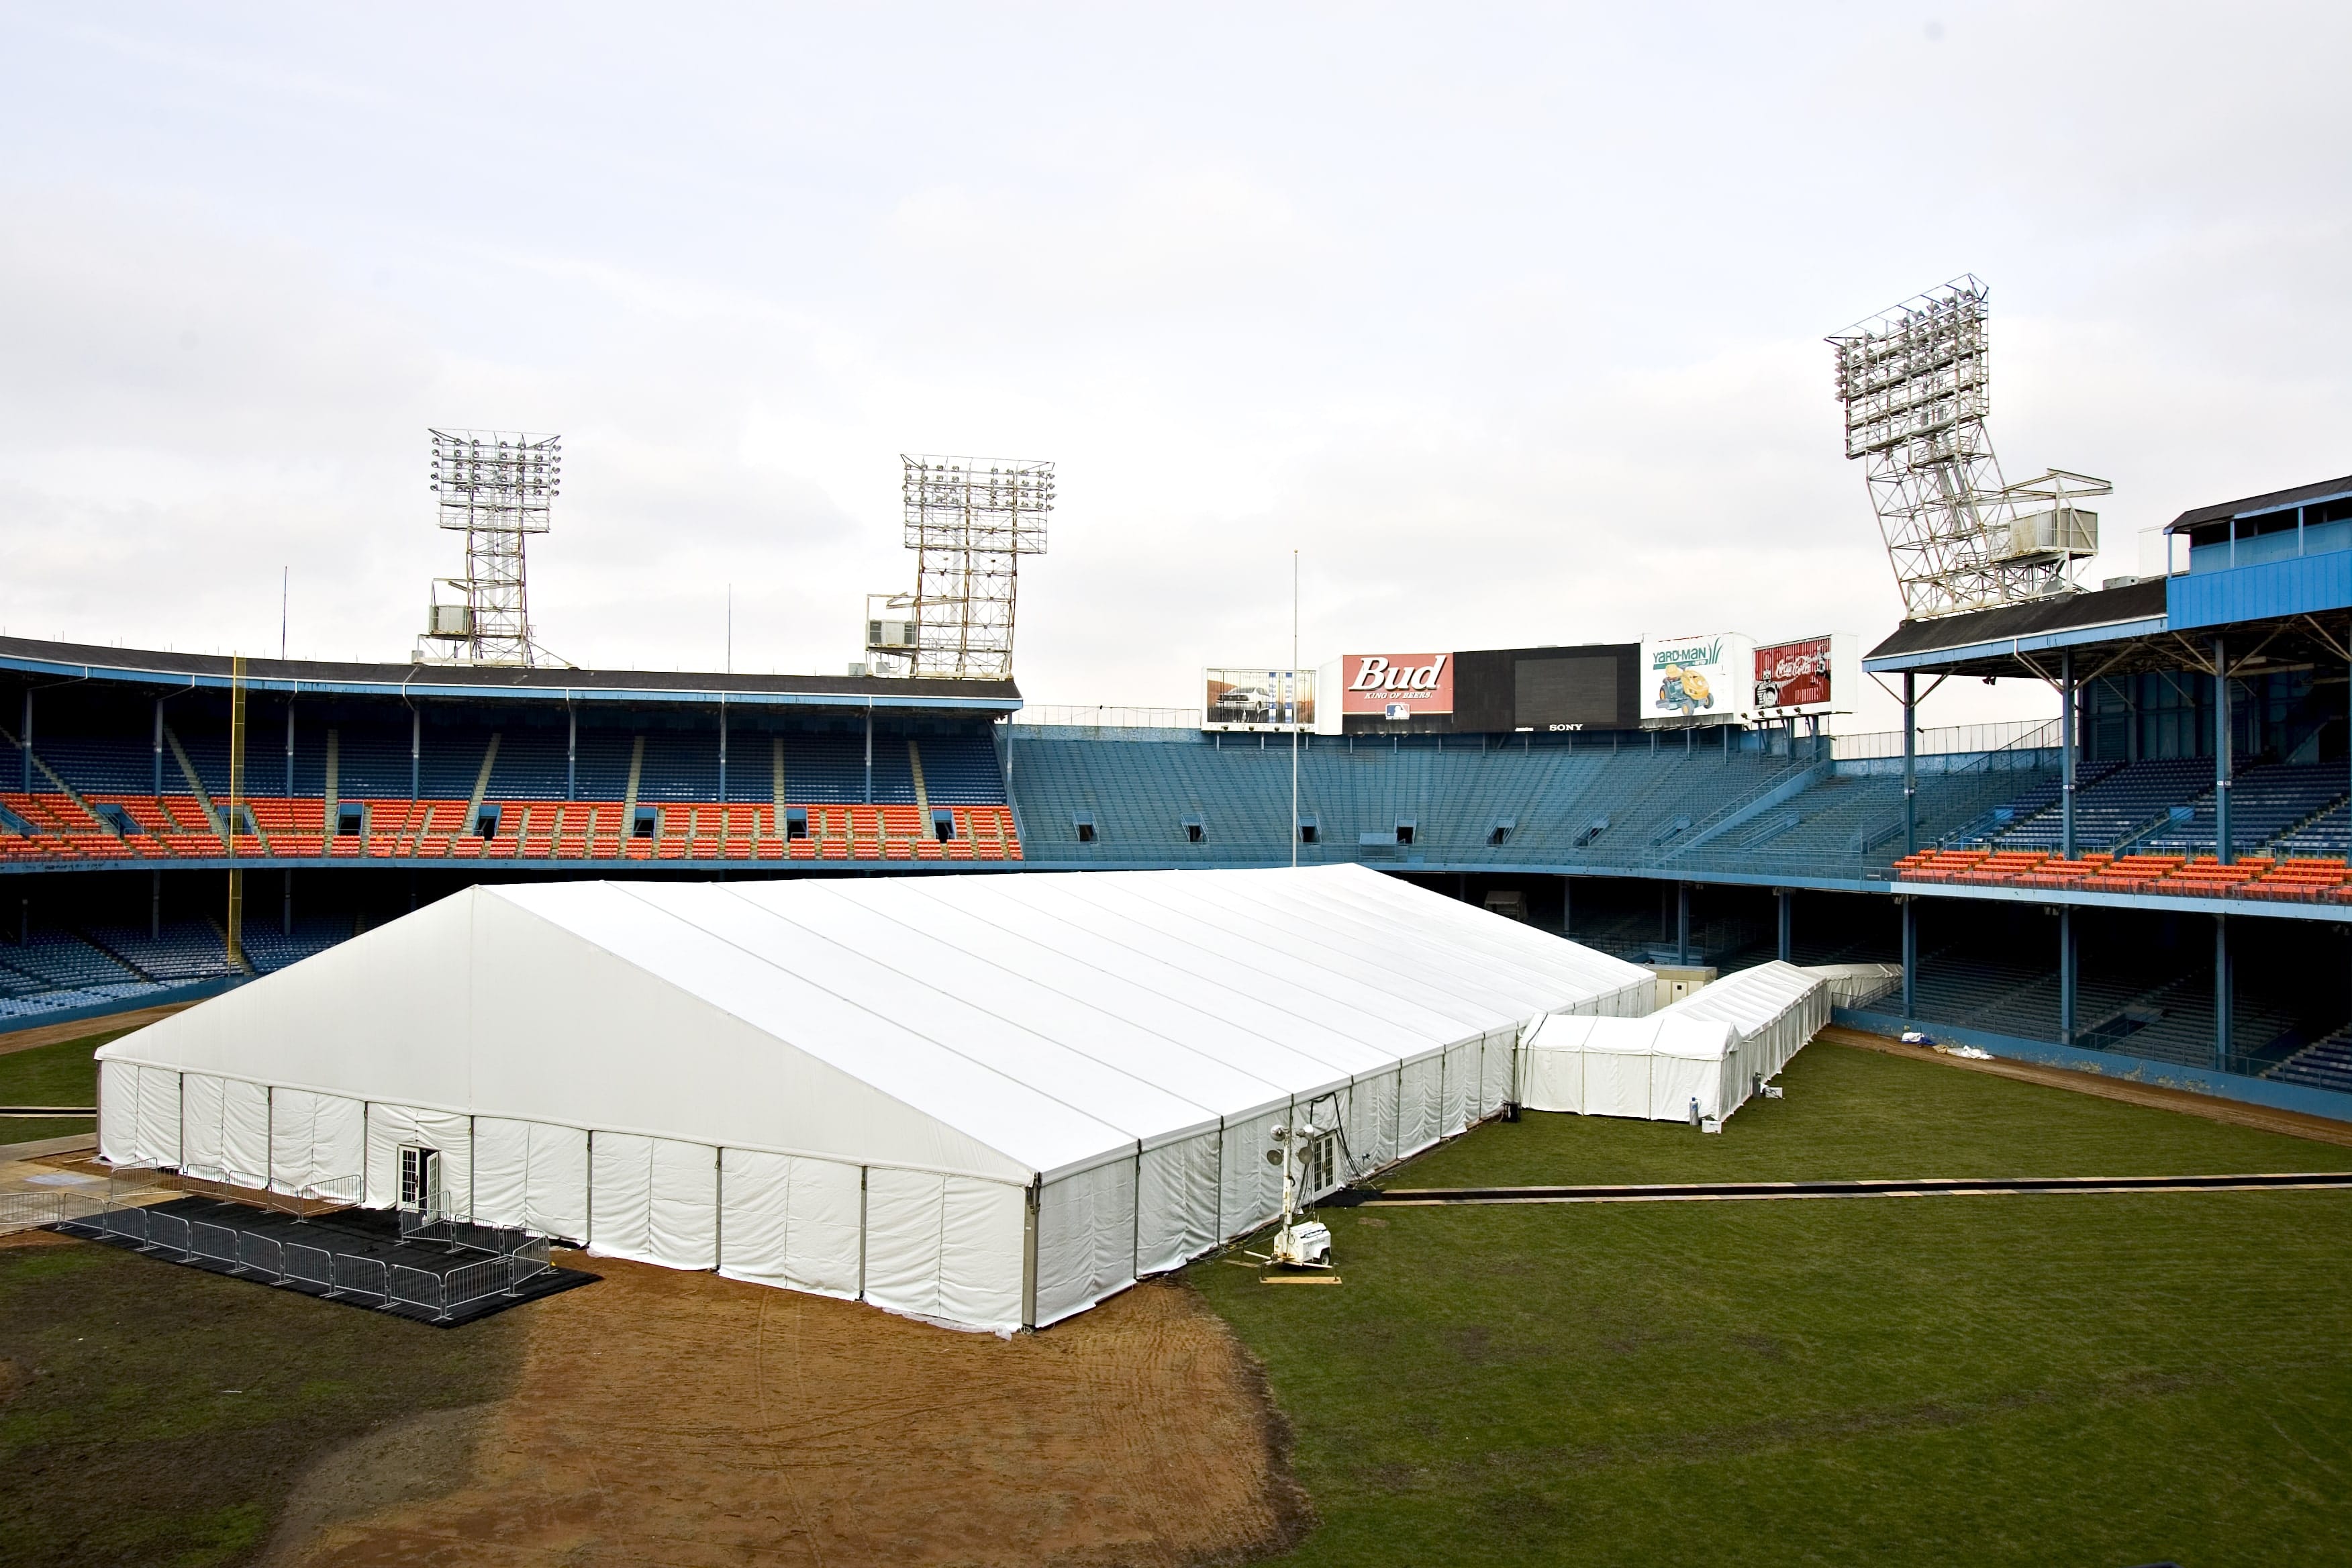 Sporting Event Tents - Our Bud Bowl at the Super Bowl - American Pavilion